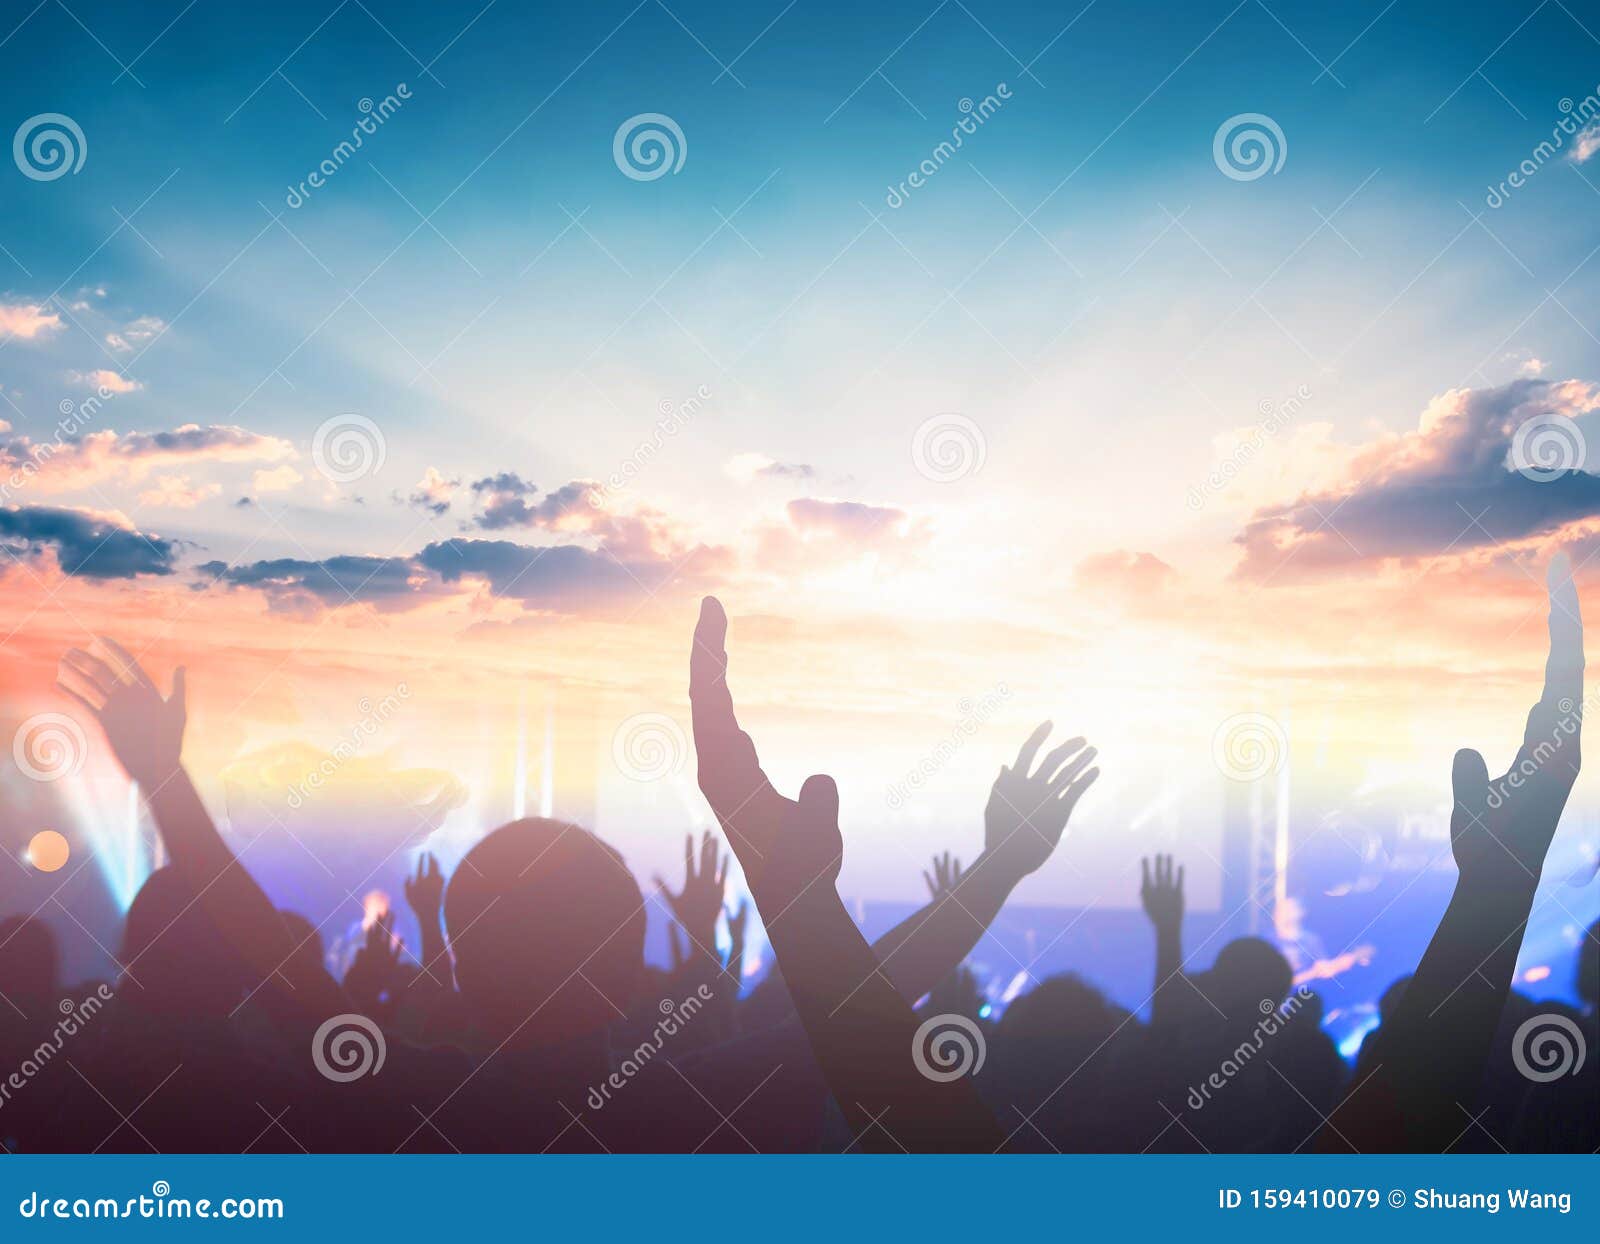 worship and praise concept: christian people hand rising on sunset background